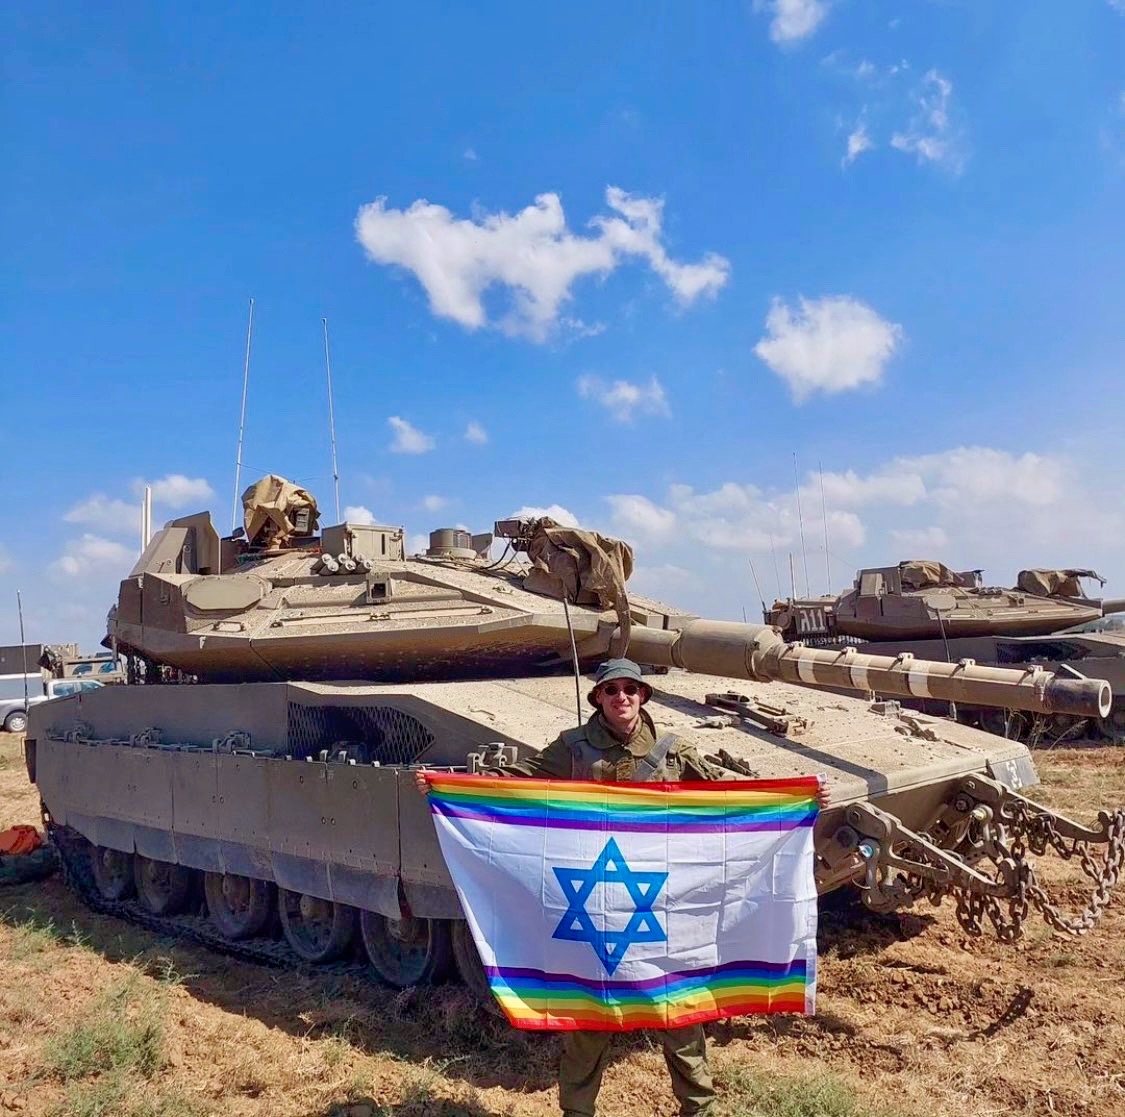 This Gay Israeli Soldier Held Up A Pride Flag During Israel’s Invasion Of Gaza And Caused A Huge Controversy